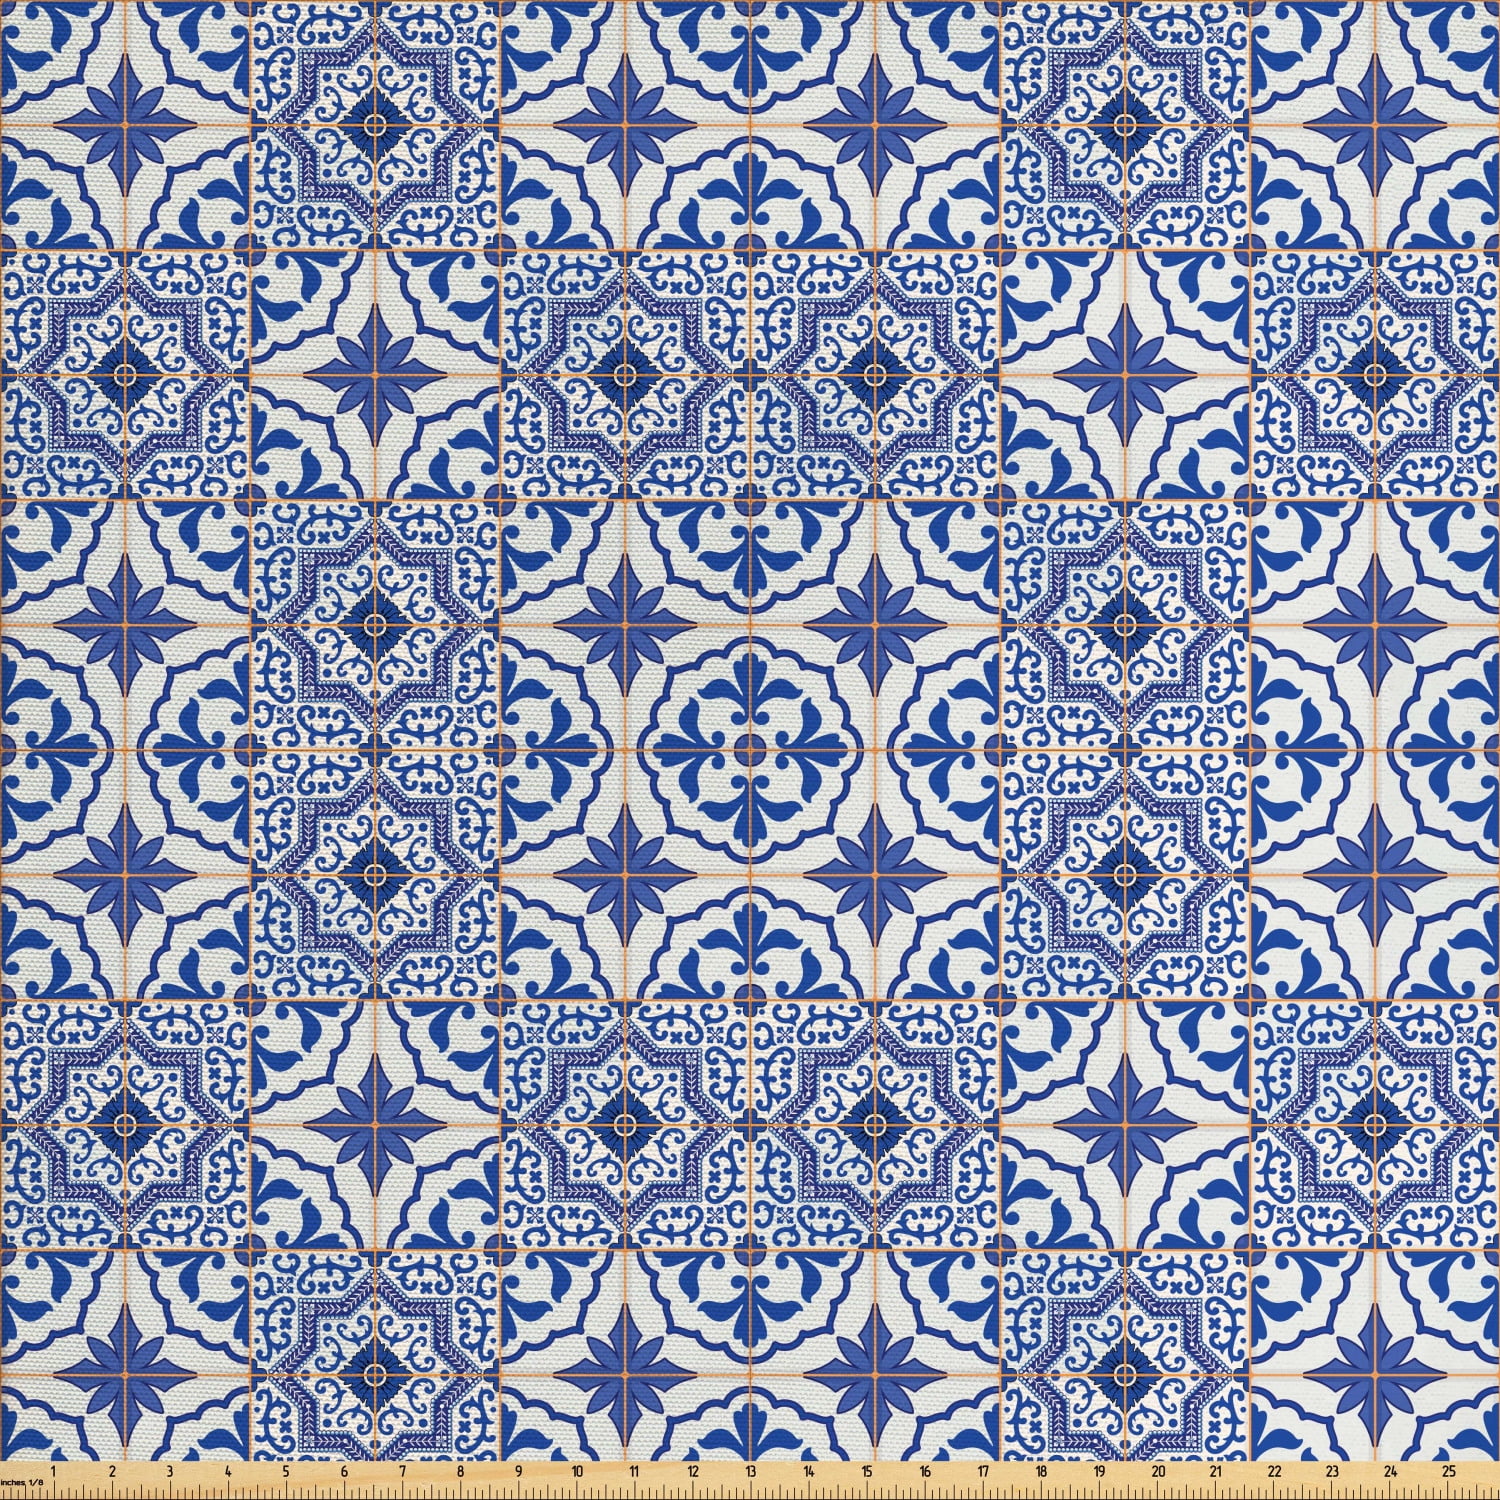 Moroccan Fabric  by The Yard Portuguese Tiles Squares Grid 